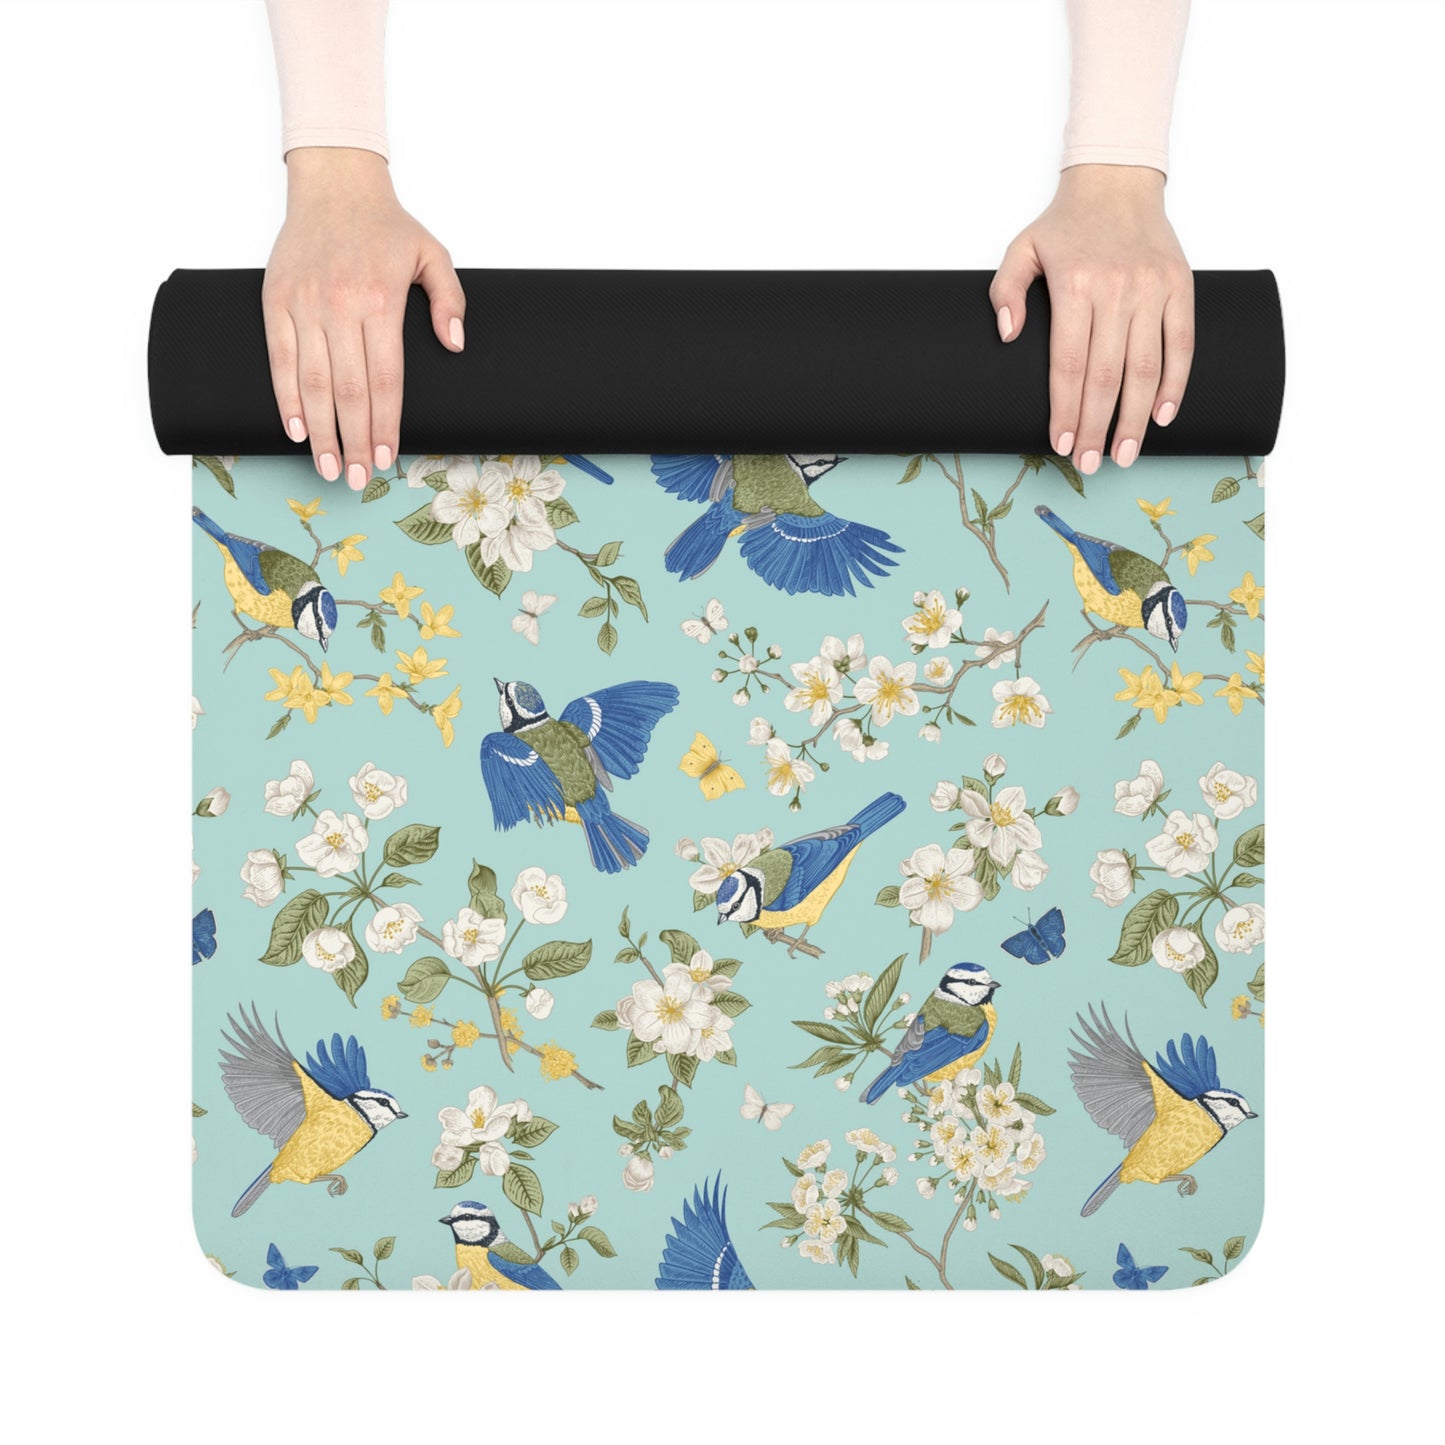 Chinoiserie Birds and Flowers Rubber Yoga Mat